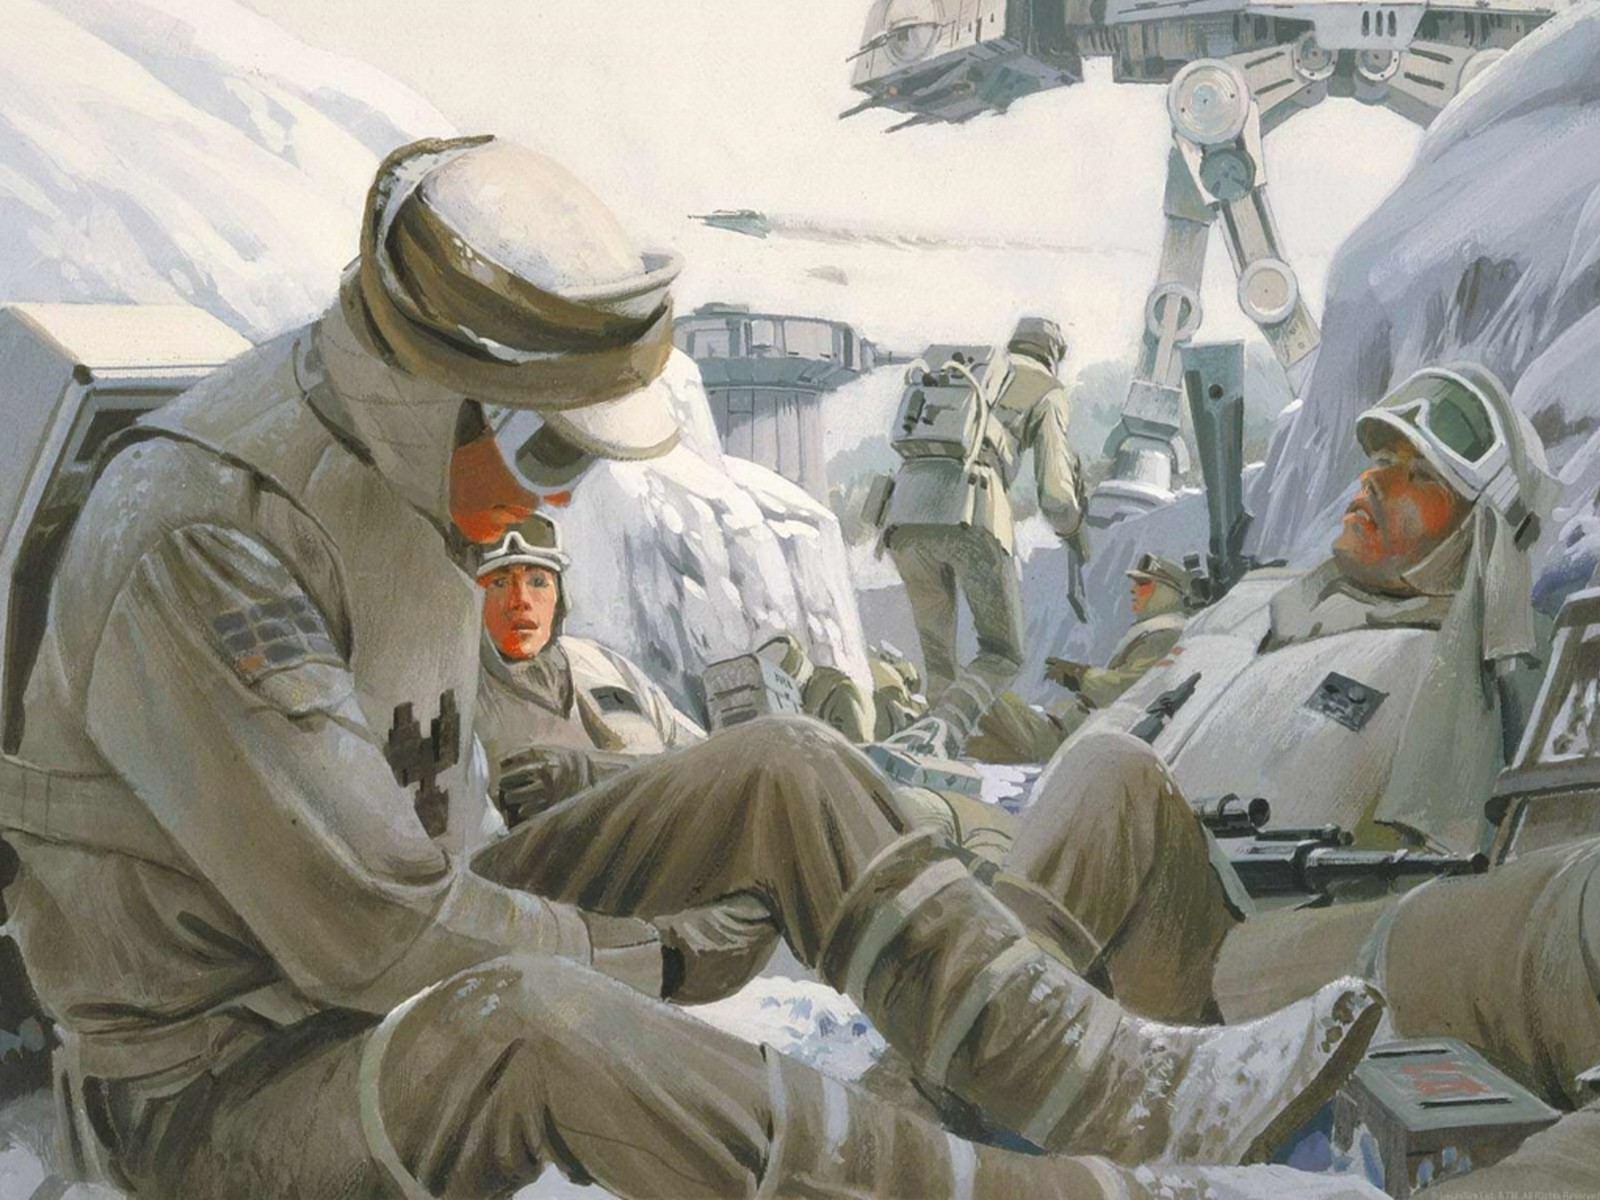 General 1600x1200 Star Wars soldier AT-AT Hoth artwork painting battle Star Wars: Episode V - The Empire Strikes Back science fiction